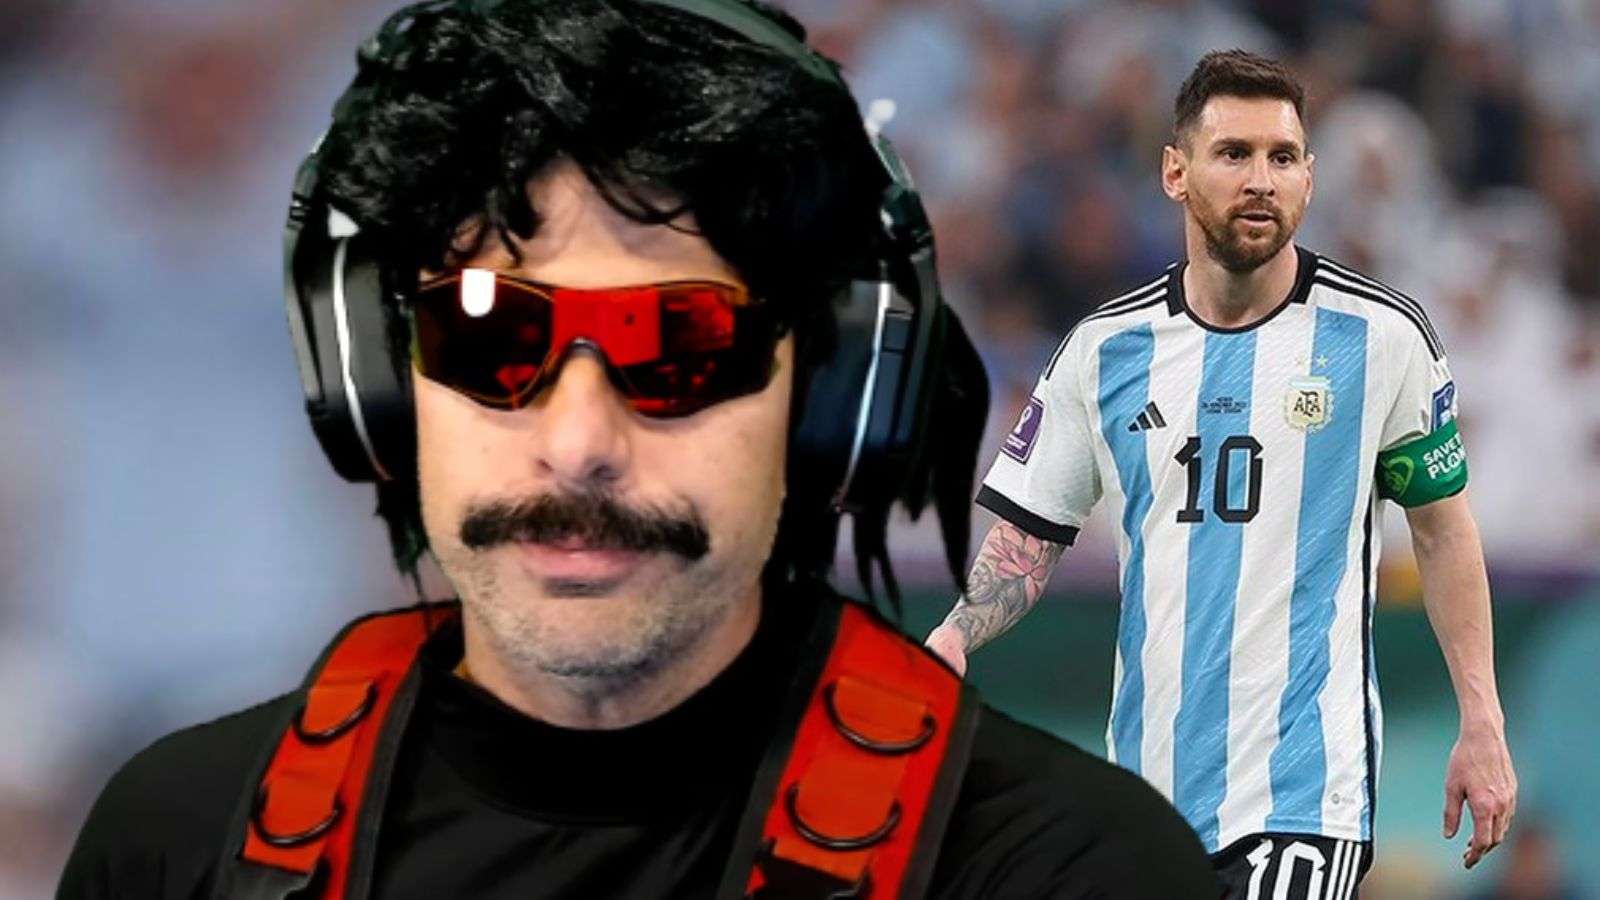 dr disrespect and lionel messi